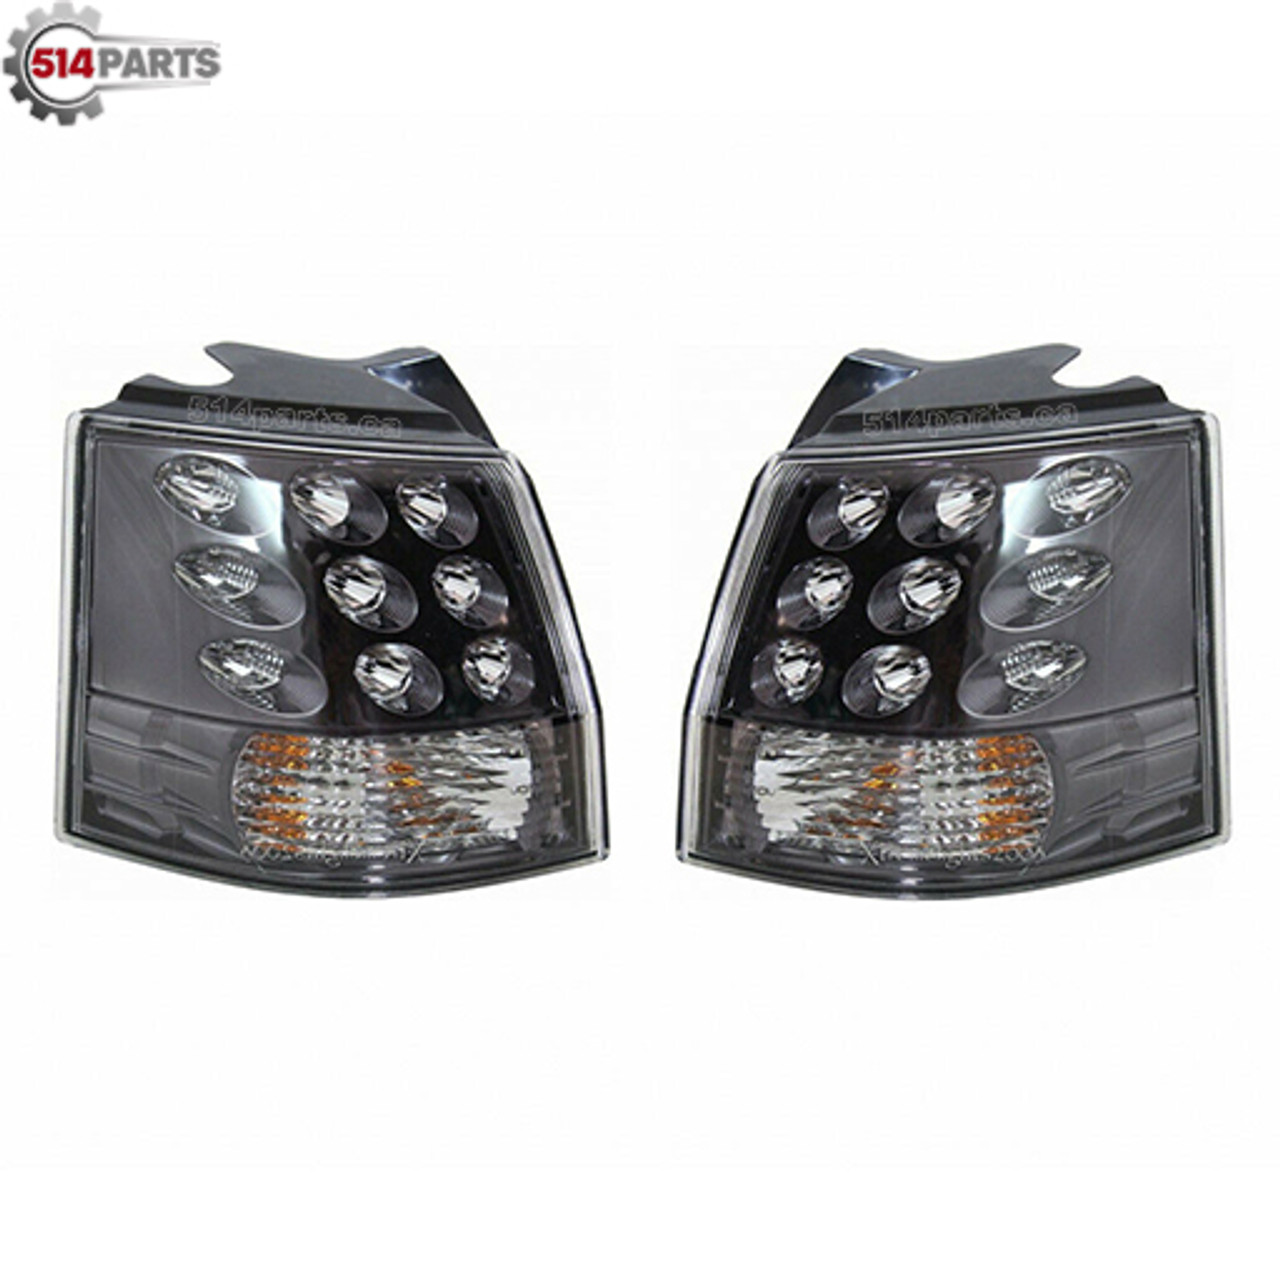 2008 - 2013 MITSUBISHI OUTLANDER TAIL LIGHTS - PHARES ARRIERE